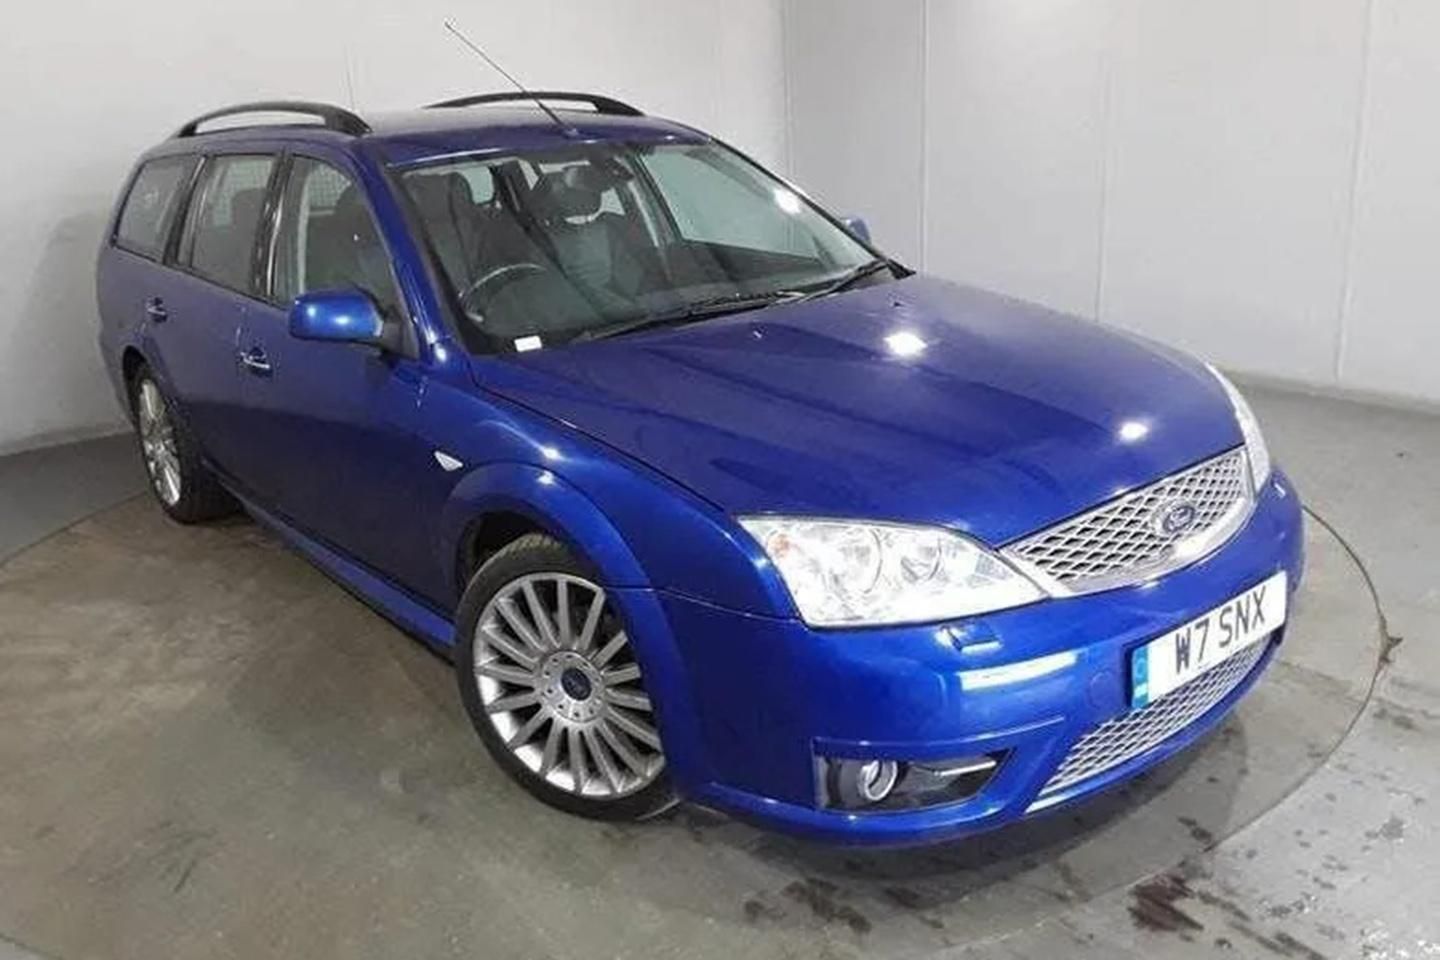 Ford Mondeo ST220 Estate  Spotted - PistonHeads UK